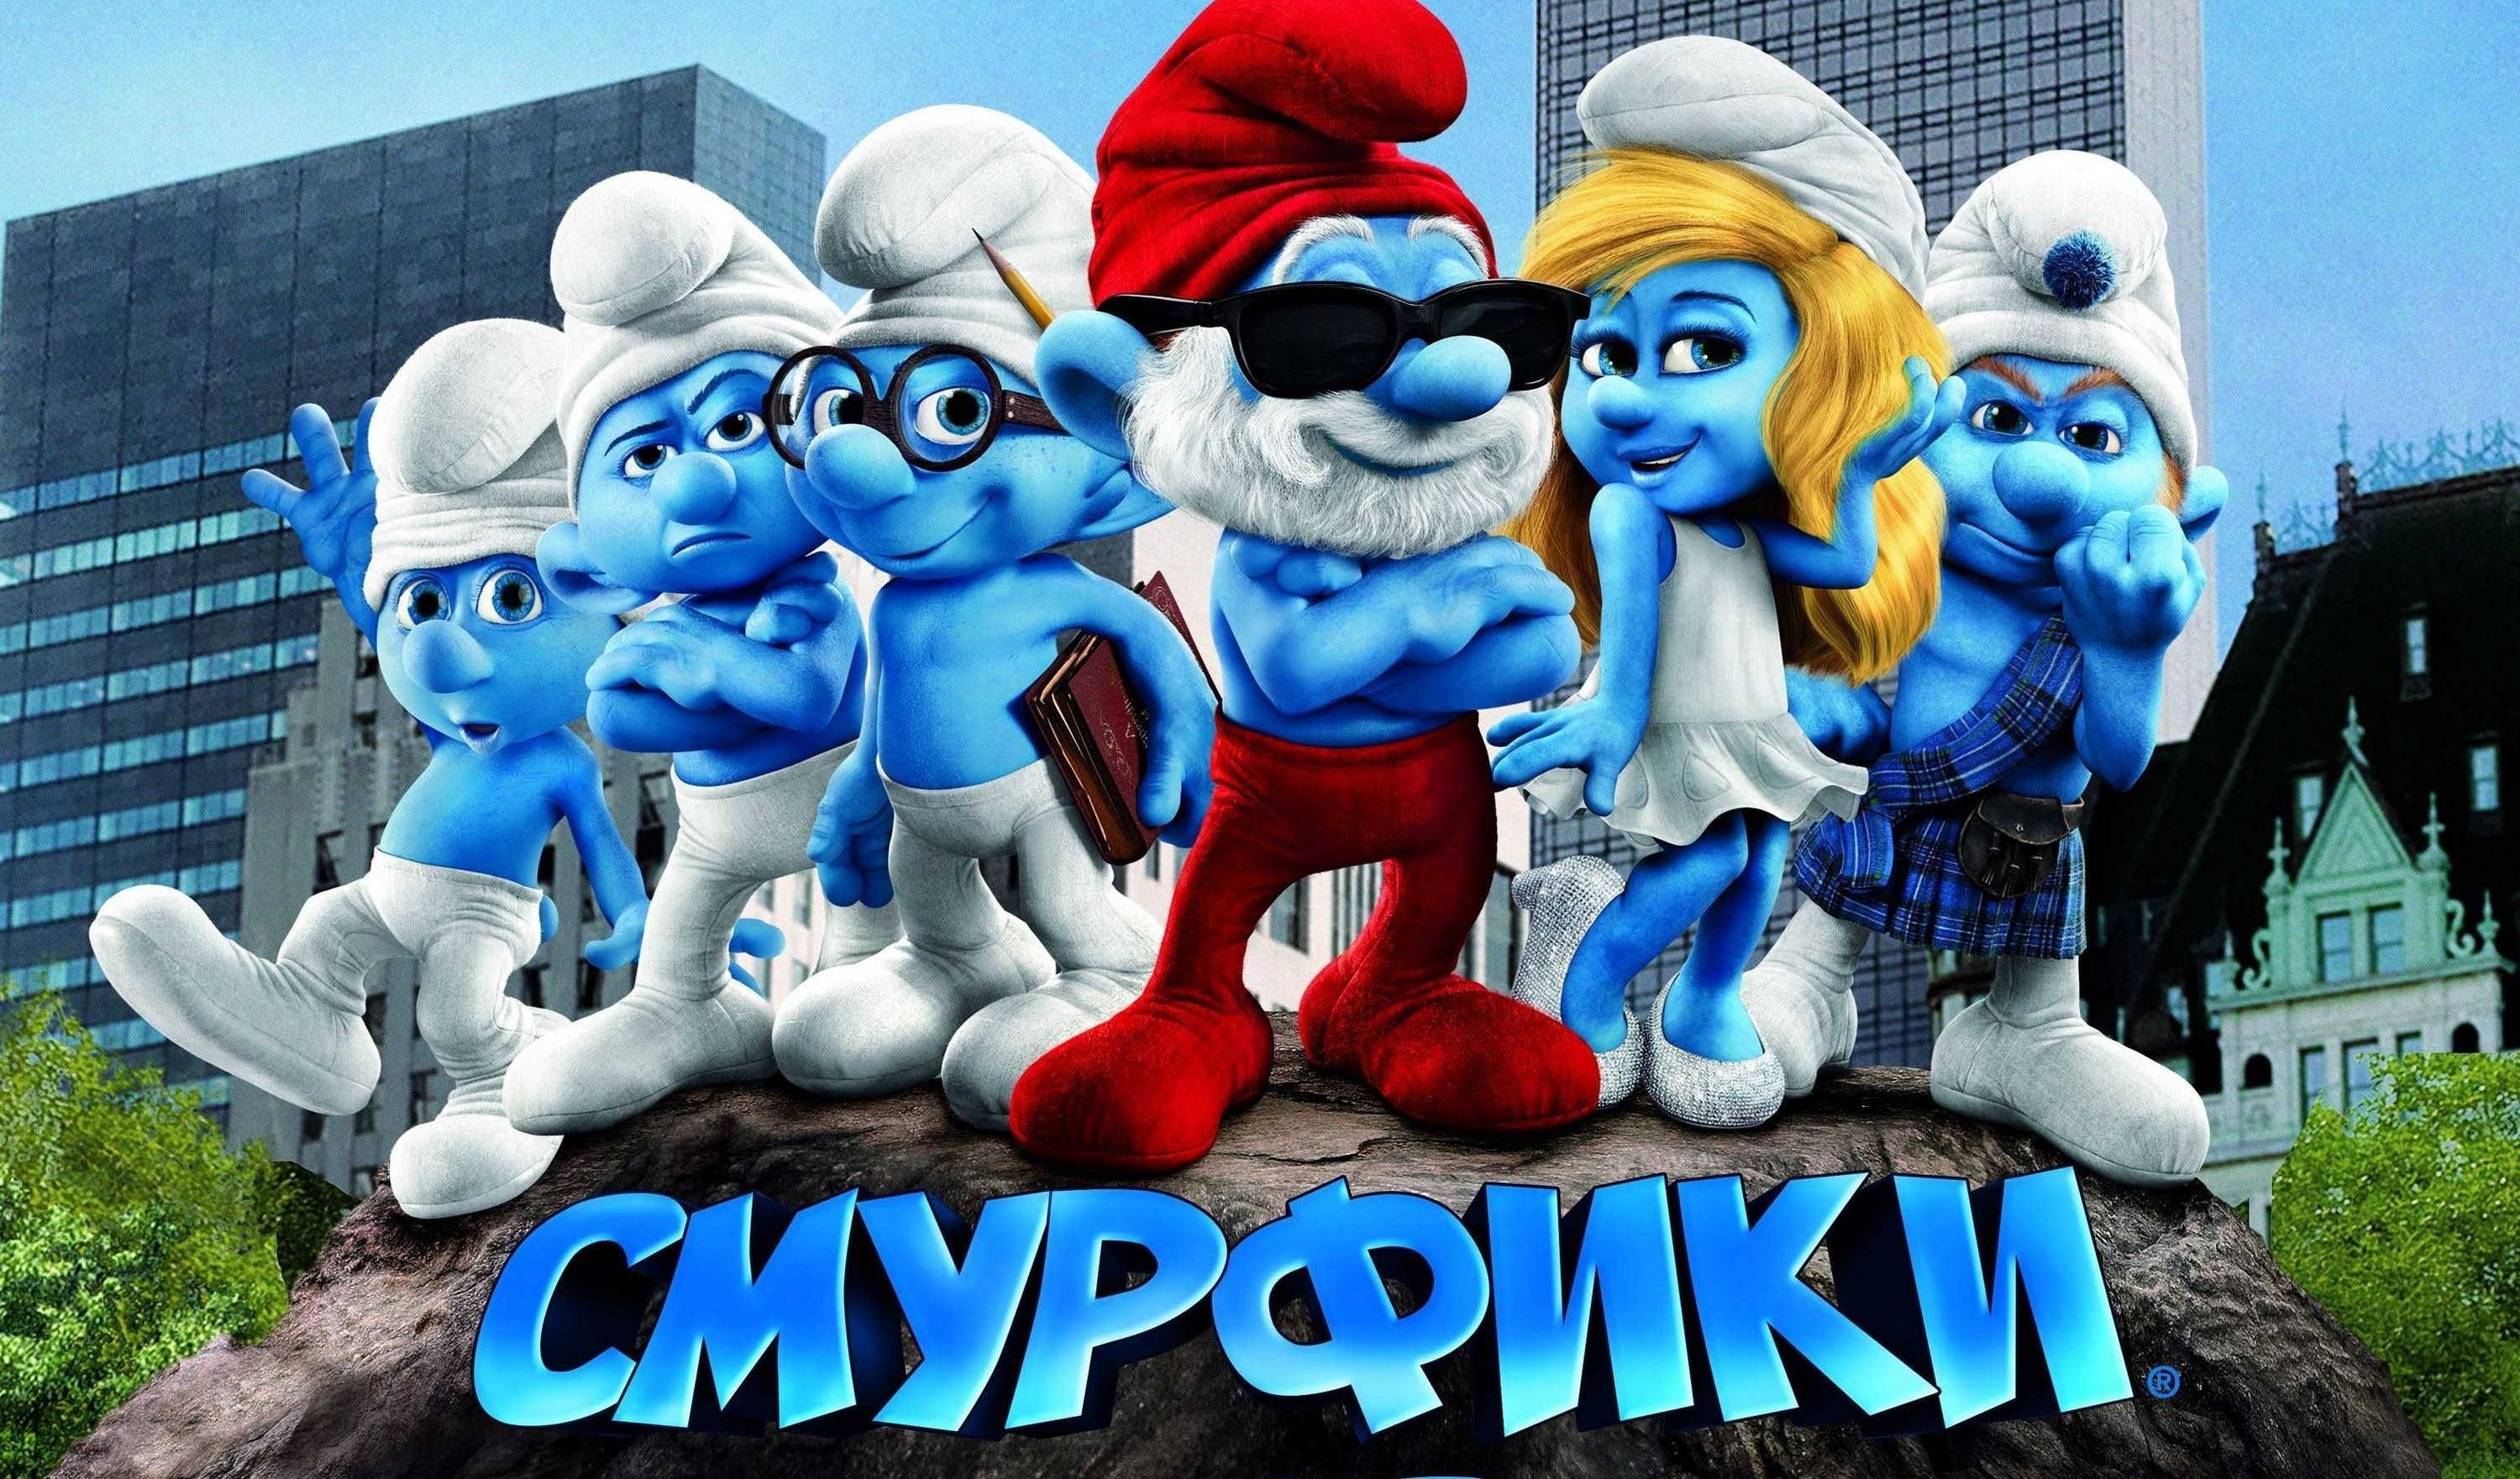 3000x1761 The Smurfs wallpapers and images - wallpapers, pictures, photos.